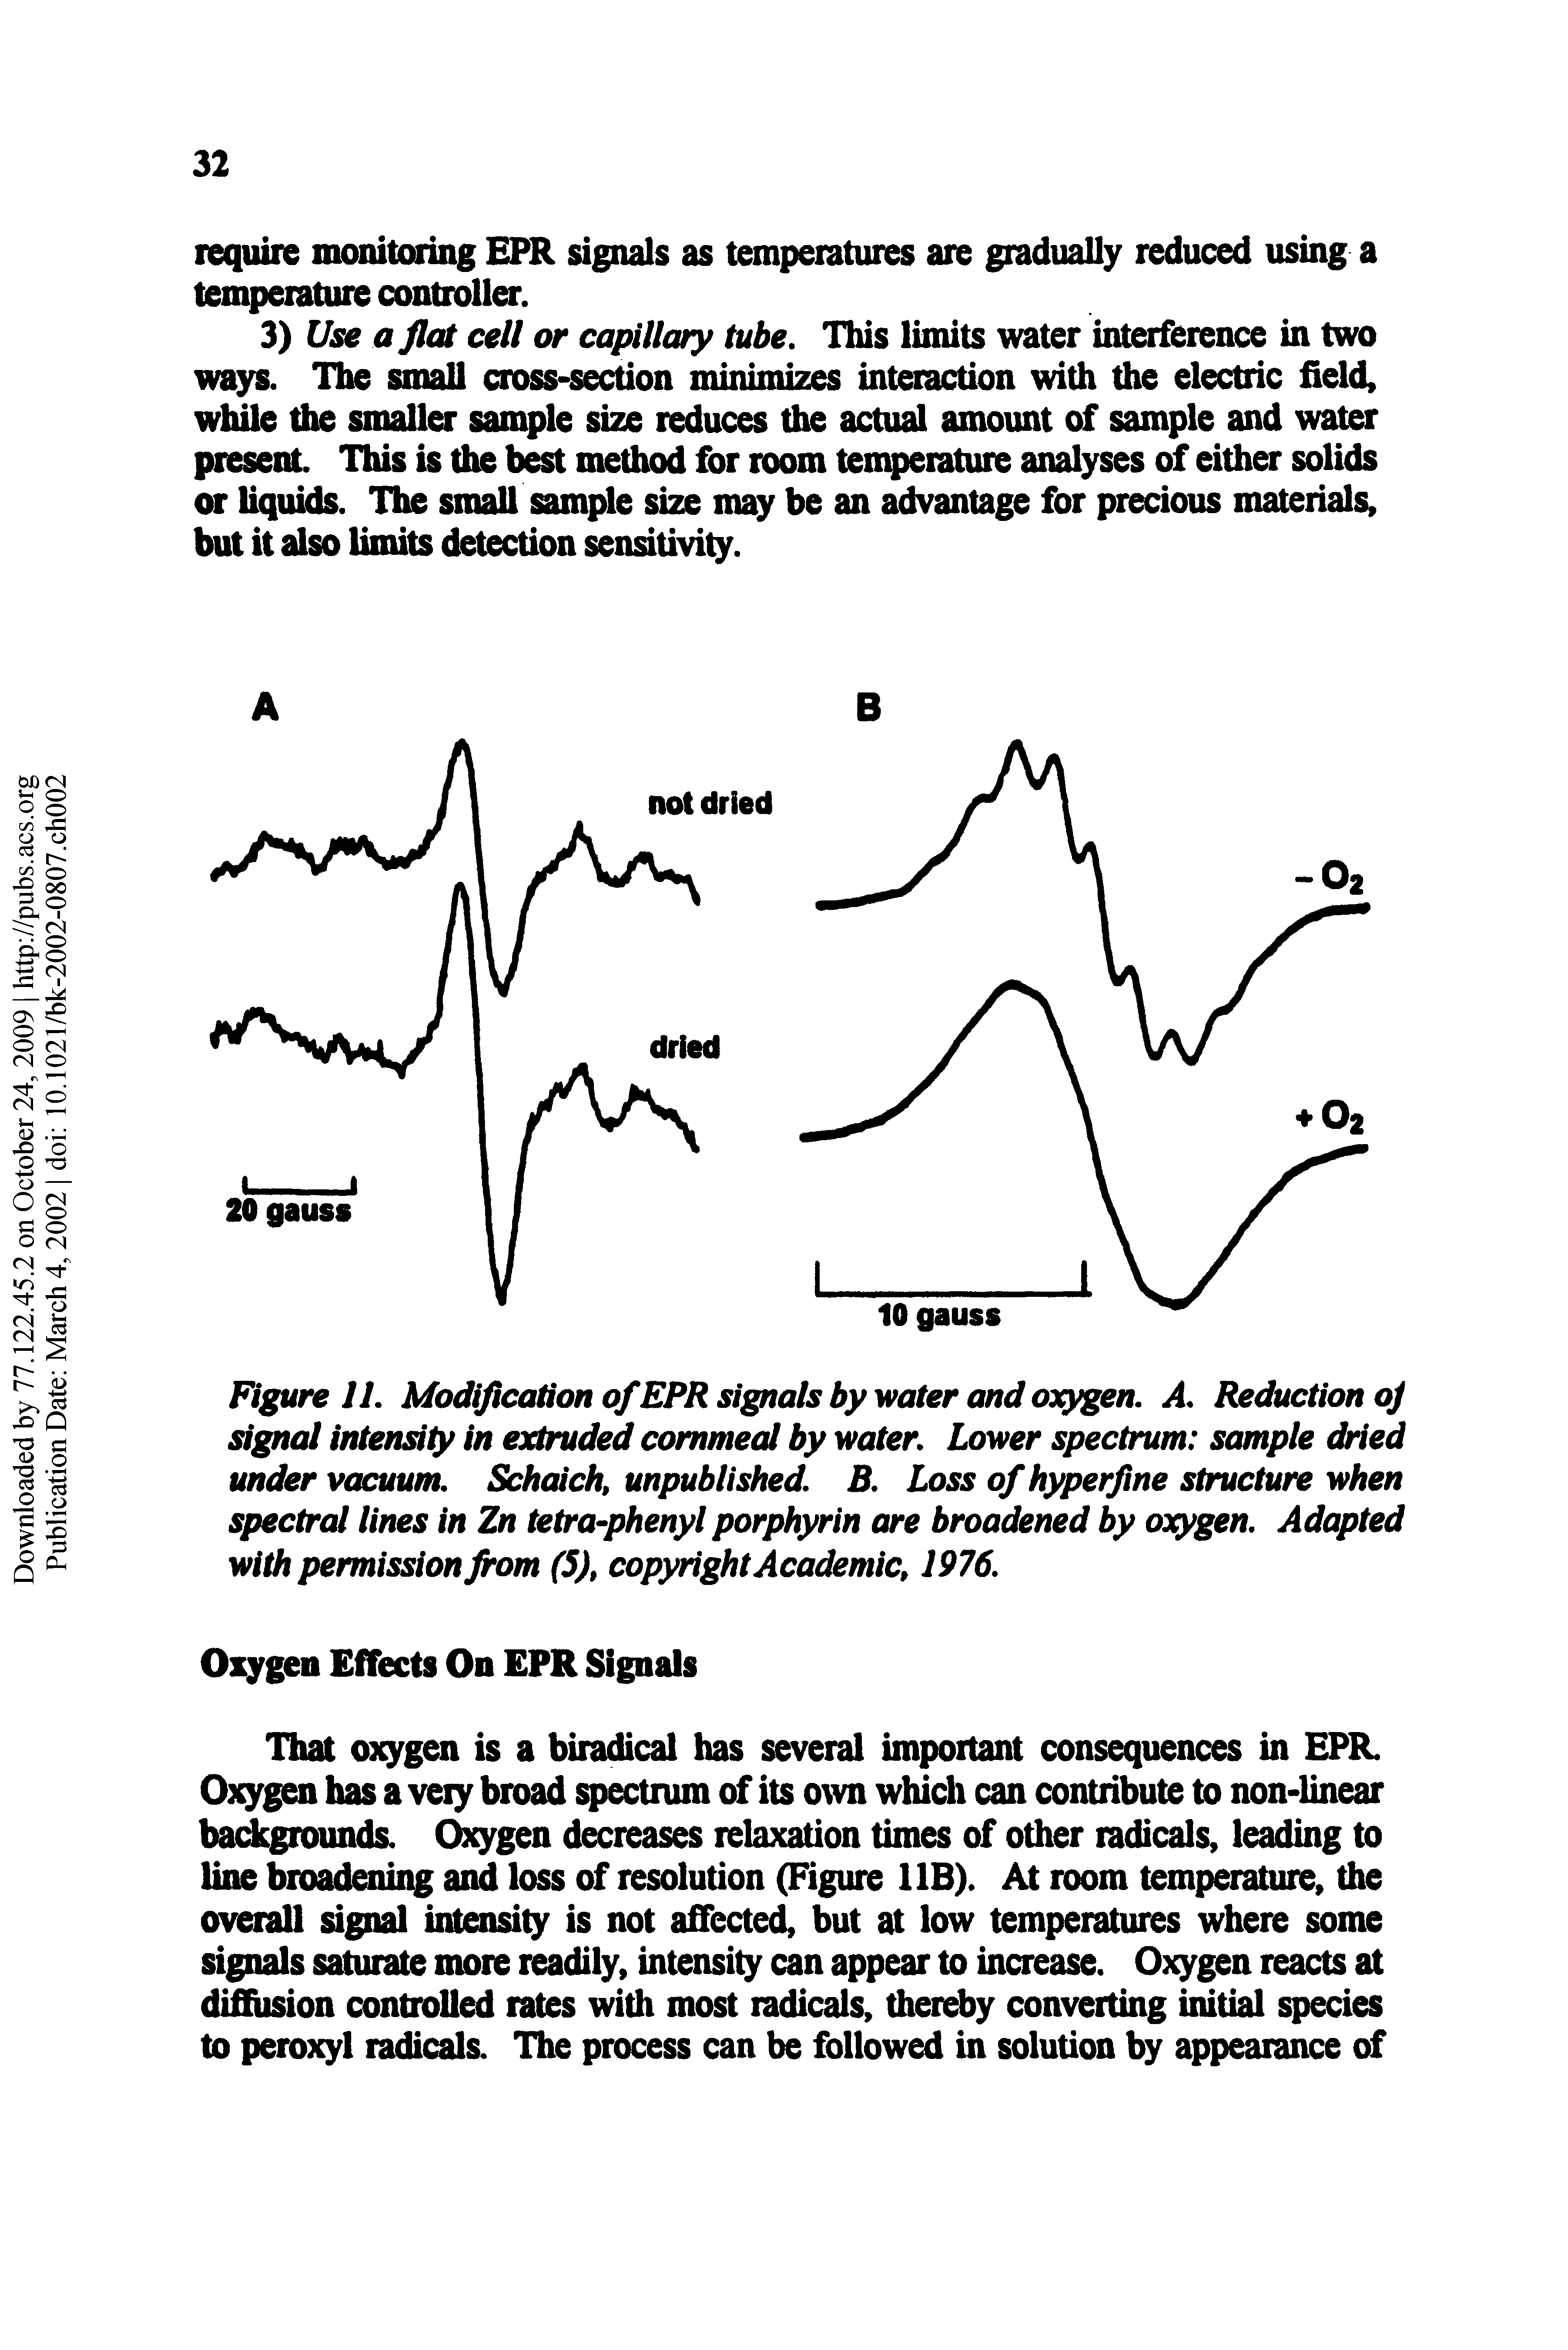 Figure 11. ModiflcaHonofEPRsigfials by water and oxygen. A. Reduction oj signal intensity in extruded commeal by water. Lower spectrum sample dried under vacuum. Schcdtd, unpublished B. Loss of hyperflne structure when spectral lines in Zn tetra-phenyl porphyrin are broadened by oxygen. Adapted with permission from (5), copyright Academic, 1976.